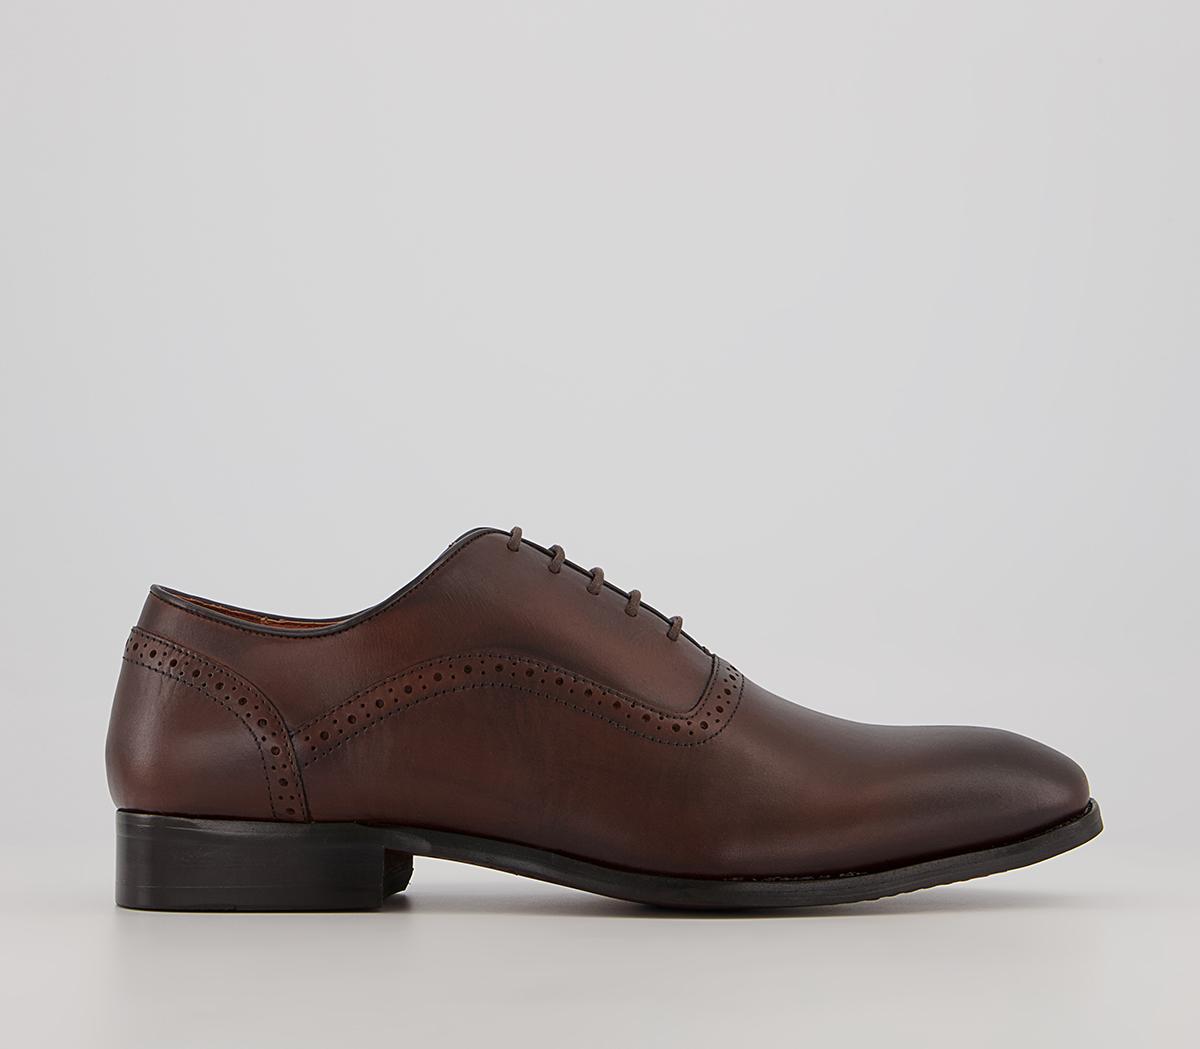 OfficeMarefield Plain Toe Oxford ShoesBrown Leather